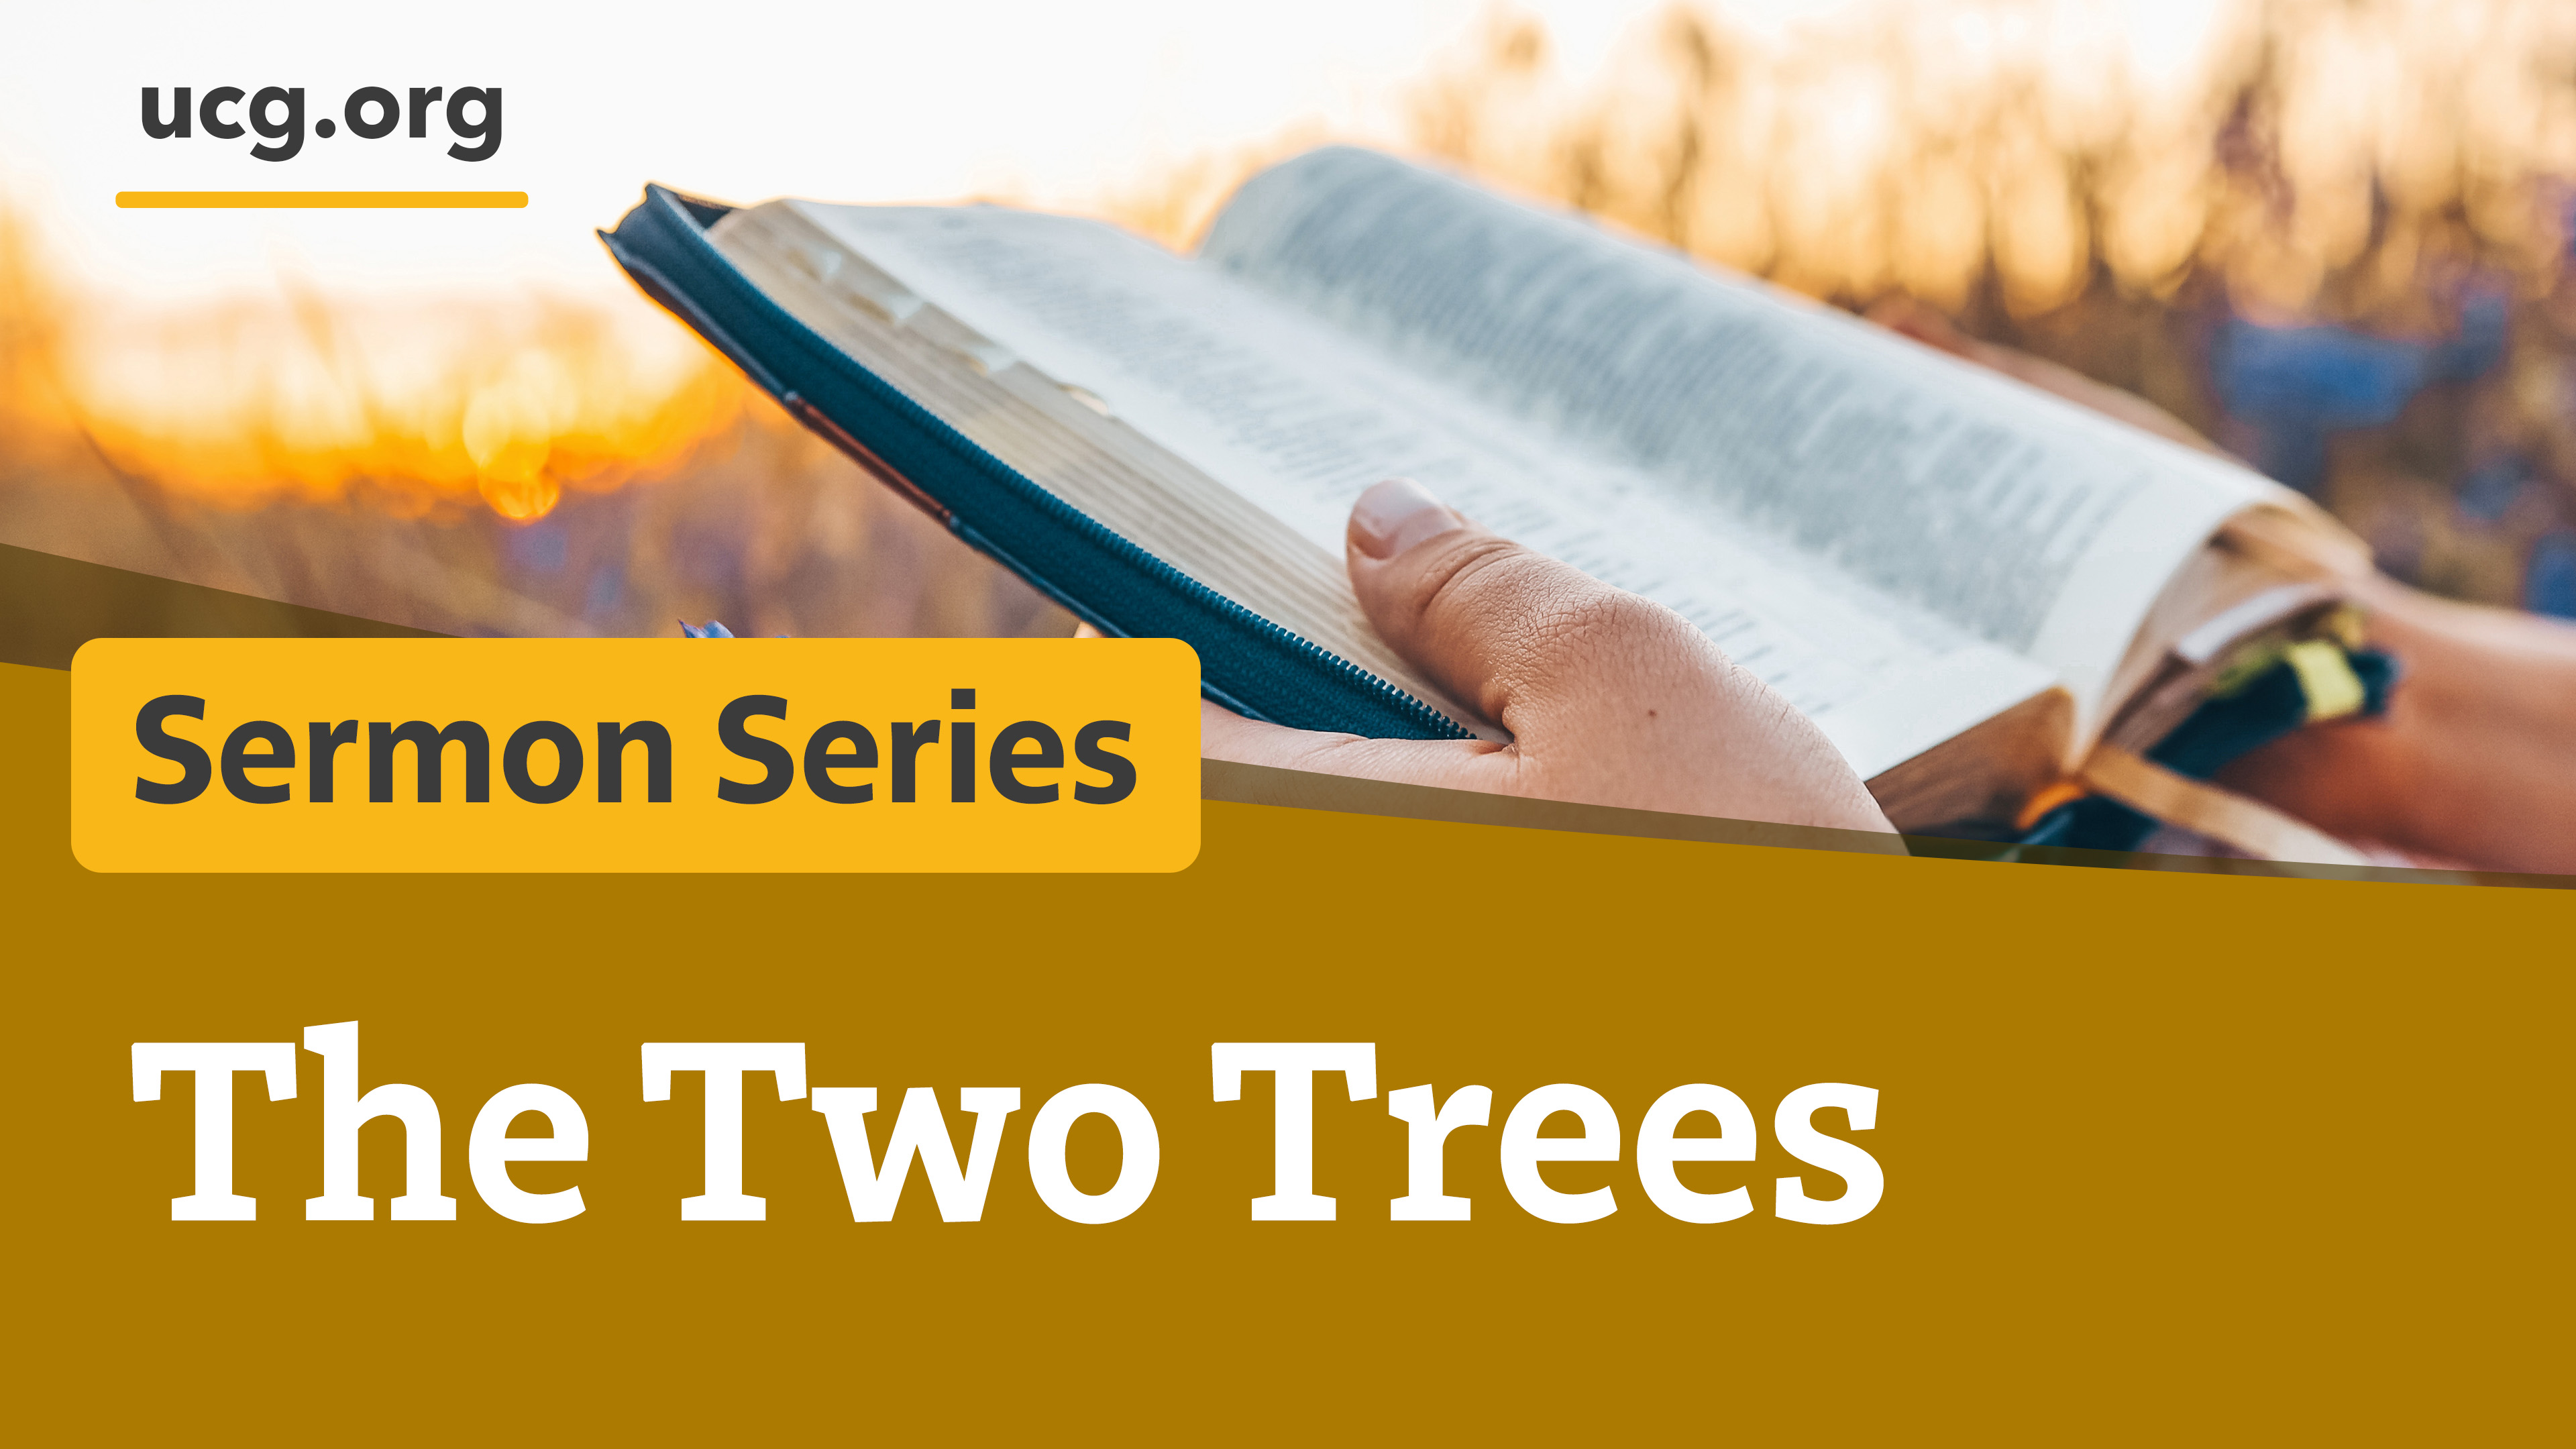 The Two Trees series